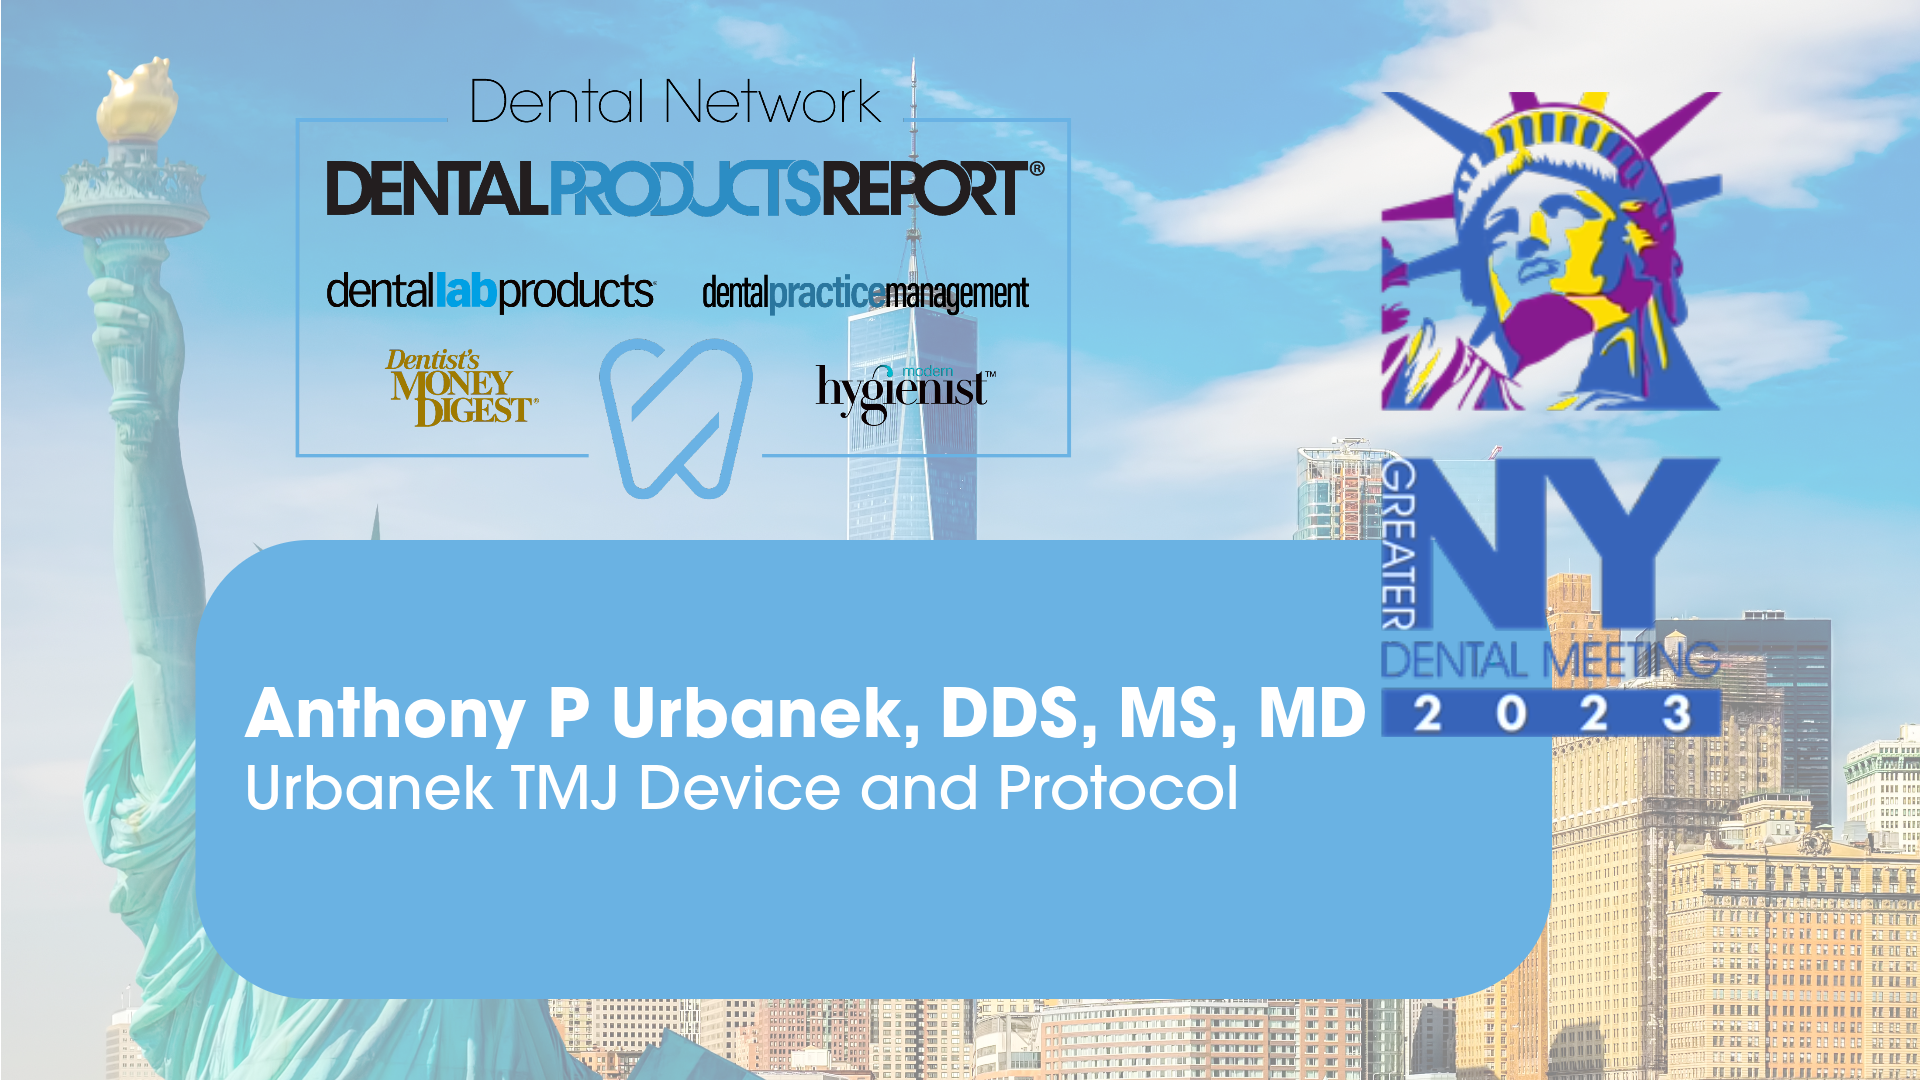 Greater New York Dental Meeting 2023 – Interview with Anthony P Urbanek, DDS, MS, MD